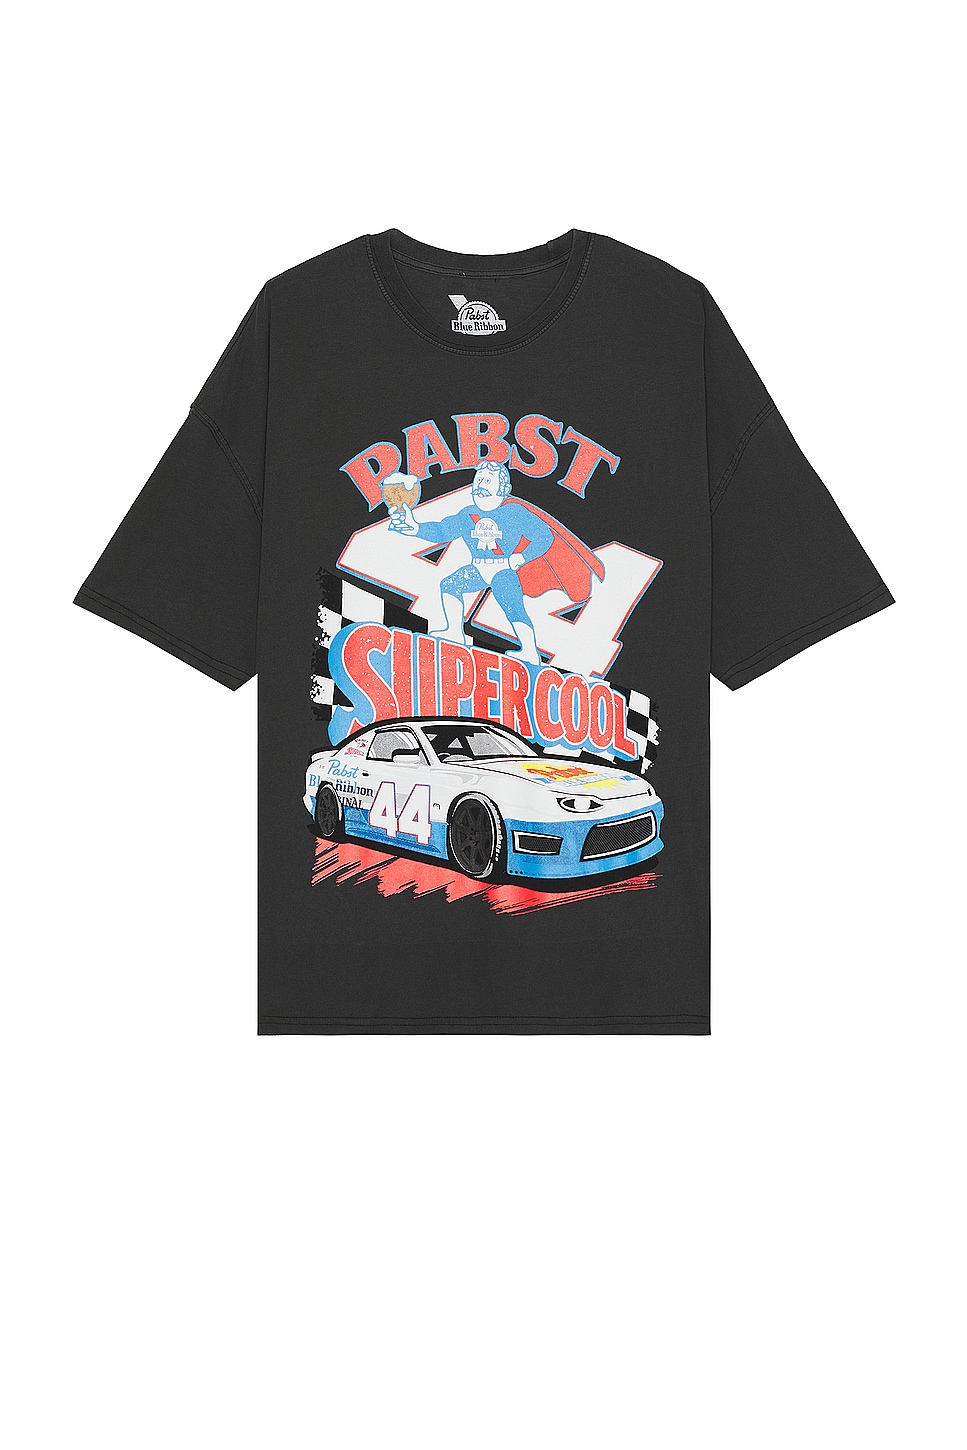 Image 1 of Philcos Pabst Supercool Racing Oversized Tee in Black Pigment